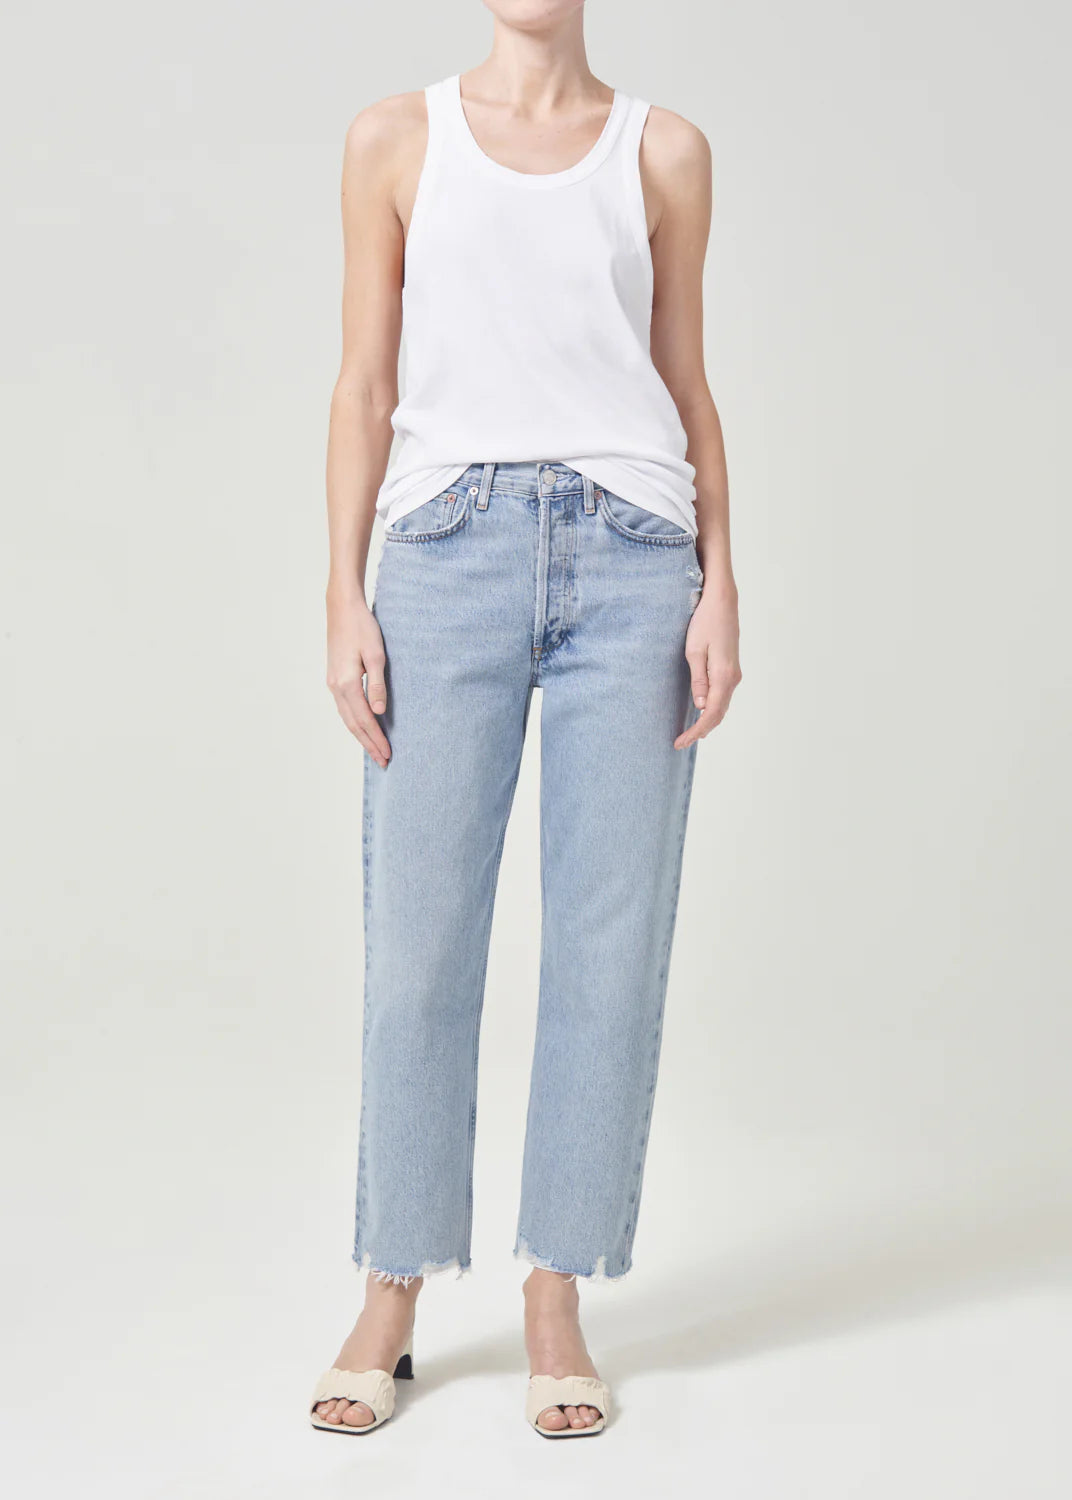 Agolde 90's crop pant in nerve (organic cotton)